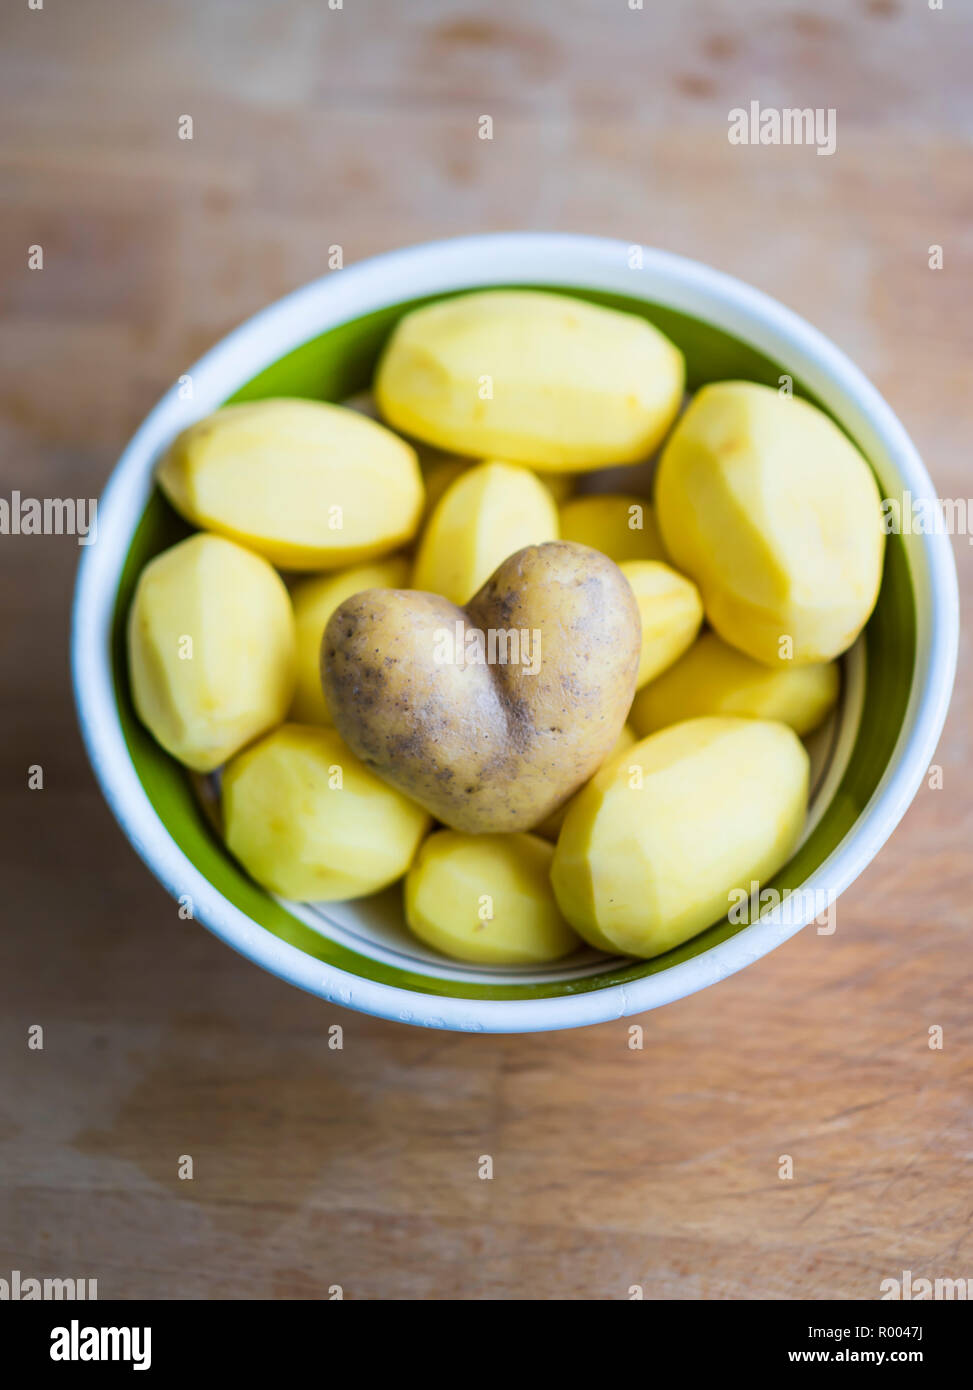 peeled potatoes in a bowl, one unpeeled potato in the shape of a heart Stock Photo